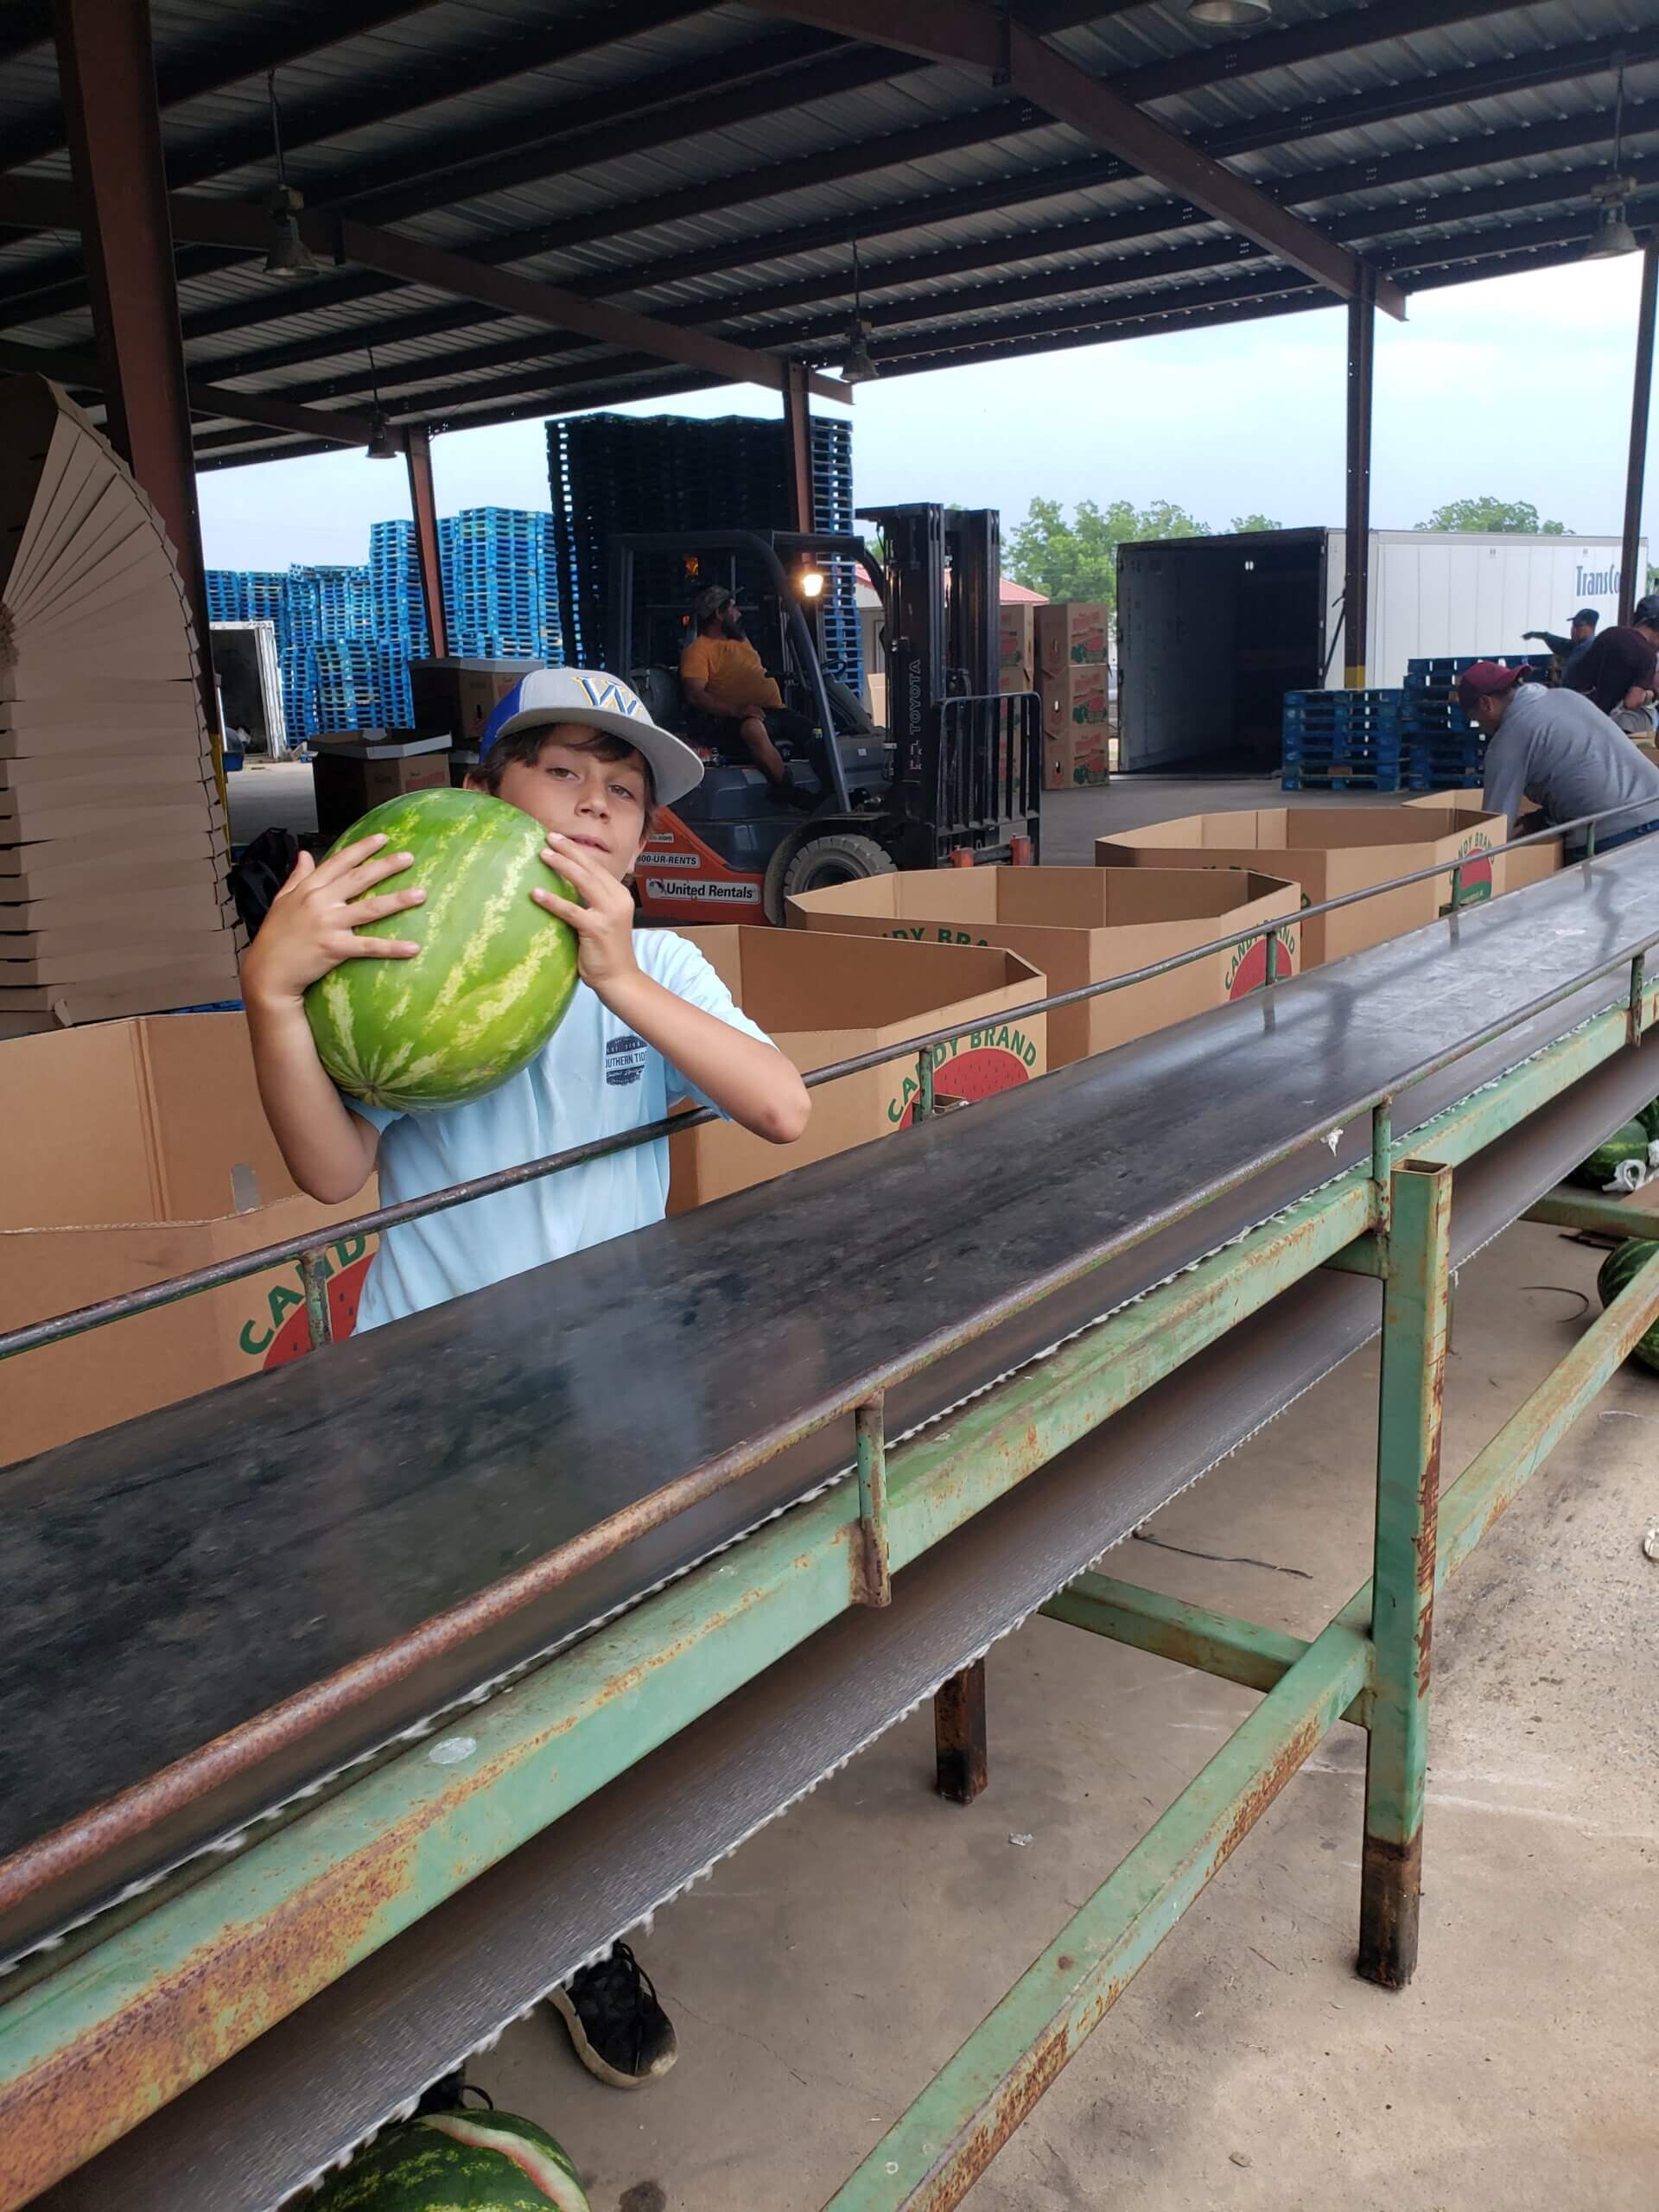 Cotton Gibbs grabs a second watermelon off the line